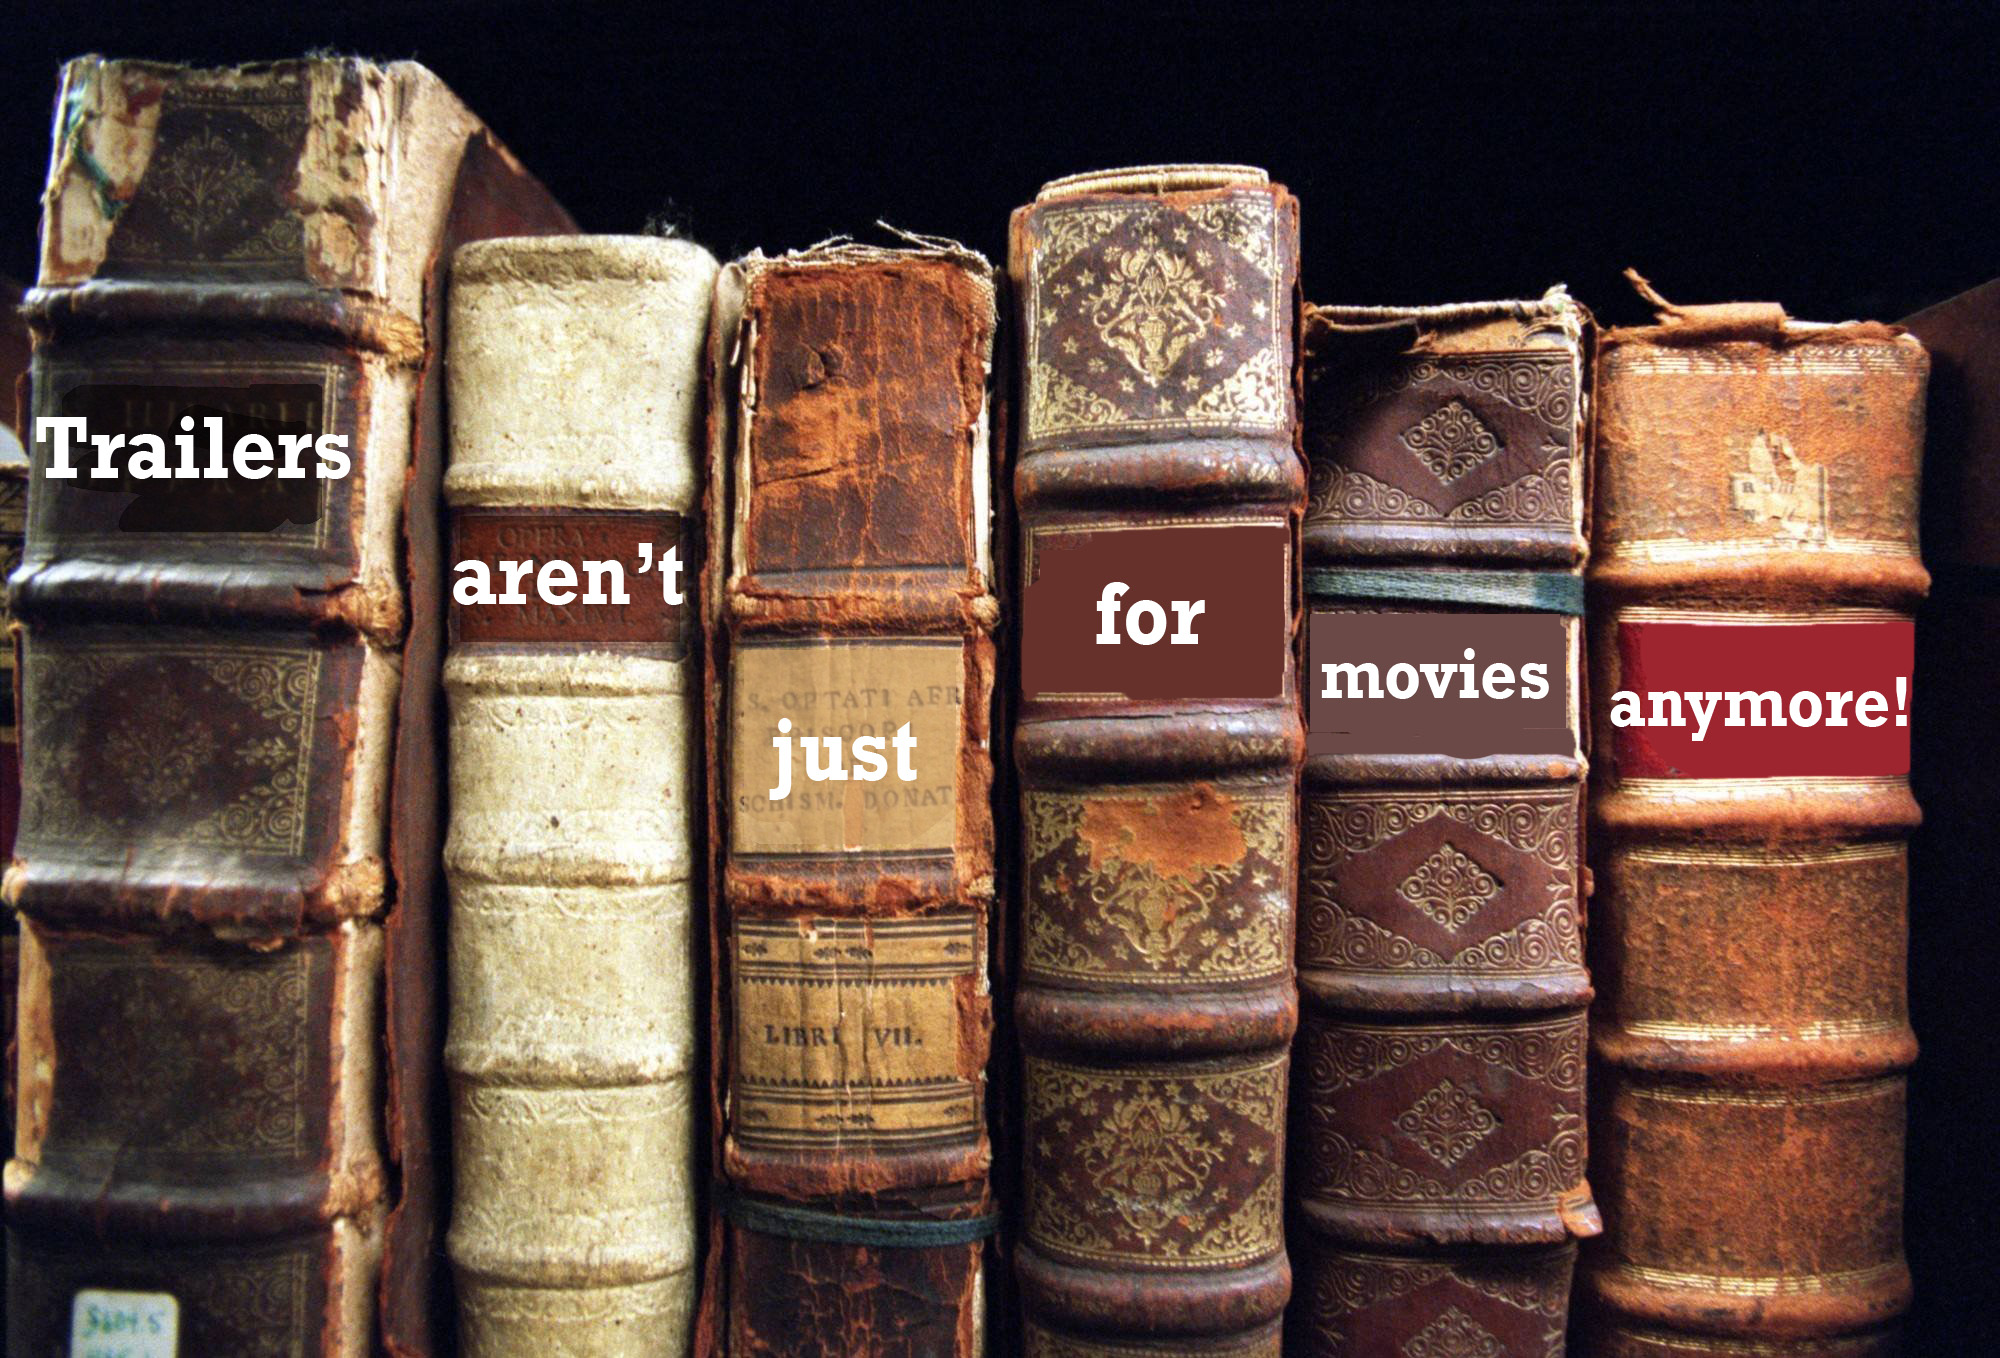 "trailers aren't just for movies anymore" written on spines of books